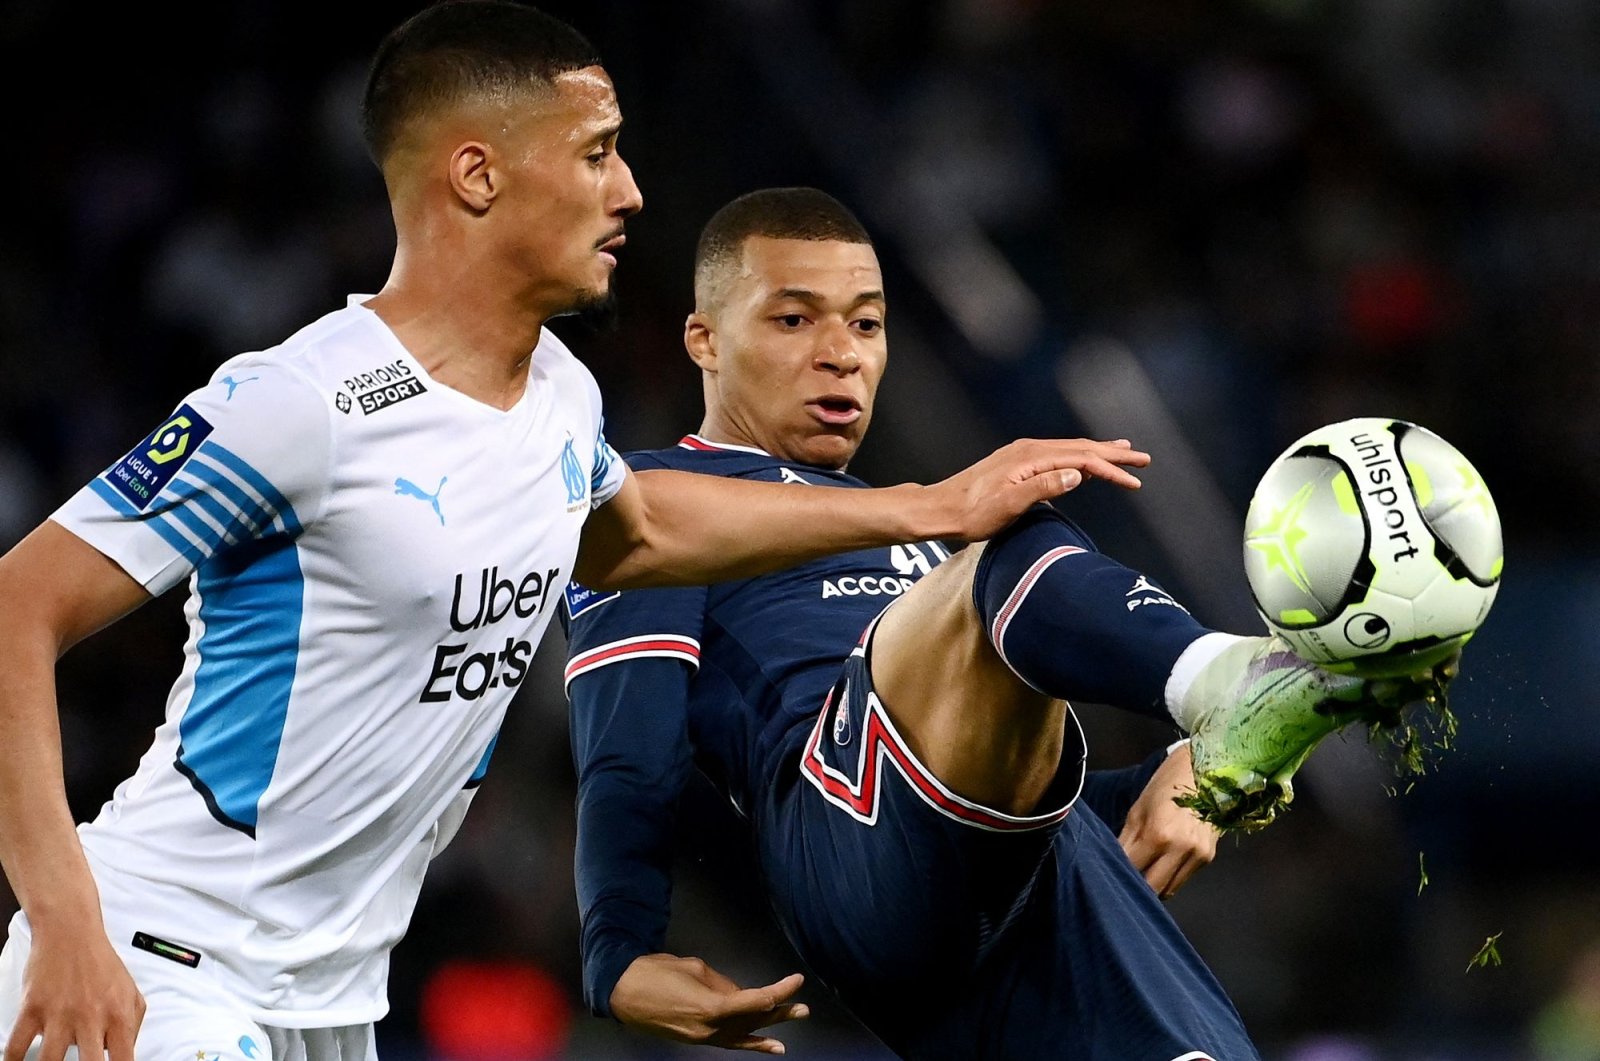 PSG&#039;s Kylian Mbappe (R) controls the ball next to Marseille&#039;s French William Saliba during a Ligue 1 match, Paris, France, April 17, 2022. (AFP Photo)